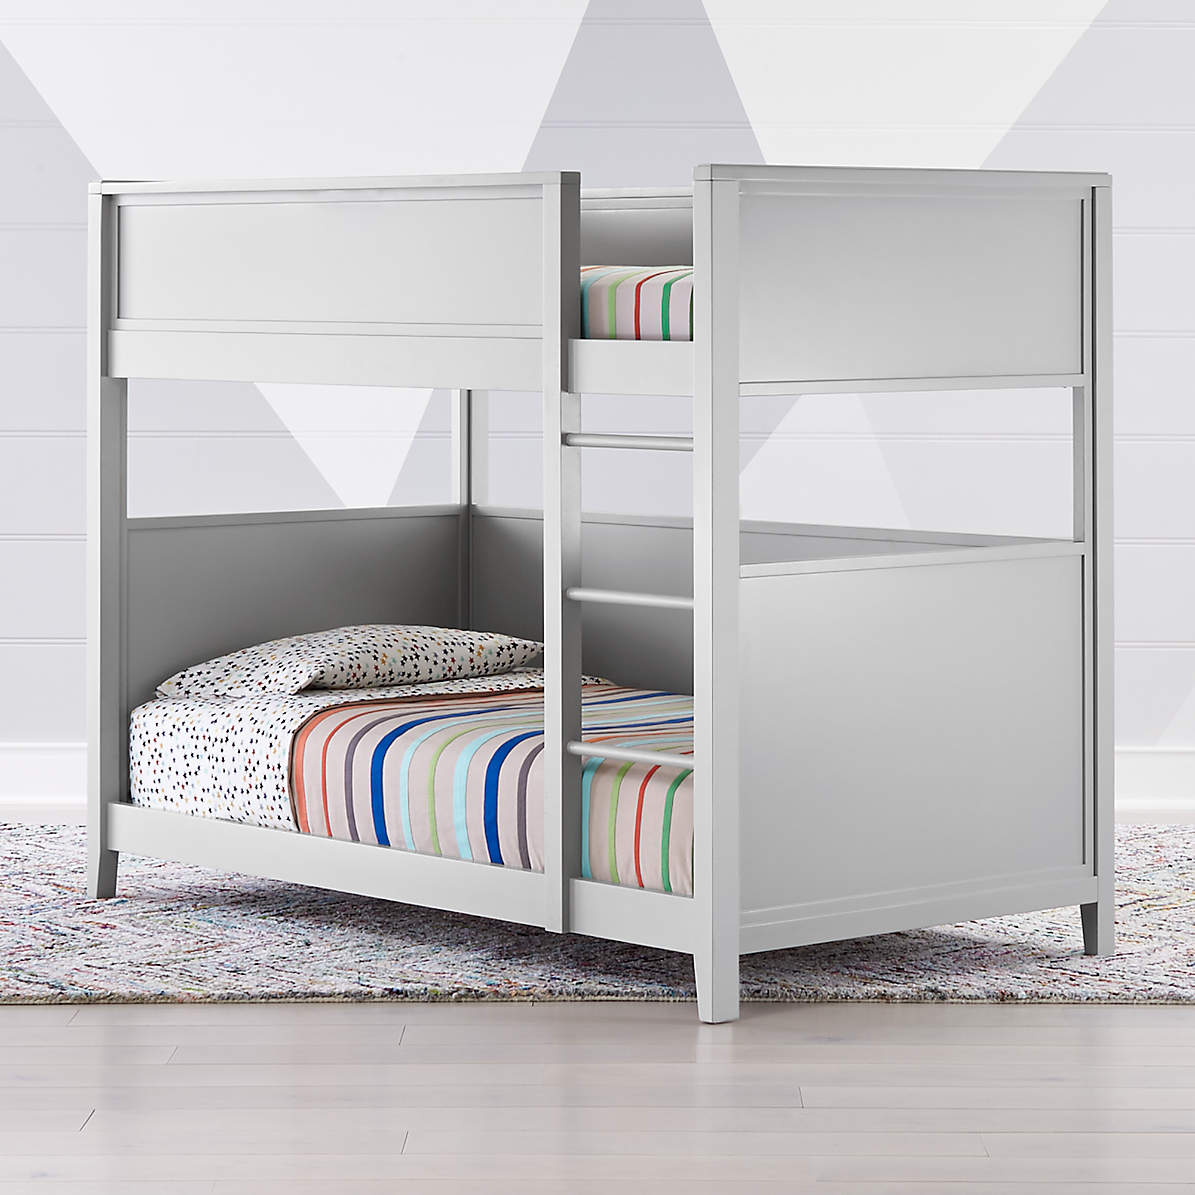 Small Space Kids Twin Bunk Bed, Bunk Bunk Beds